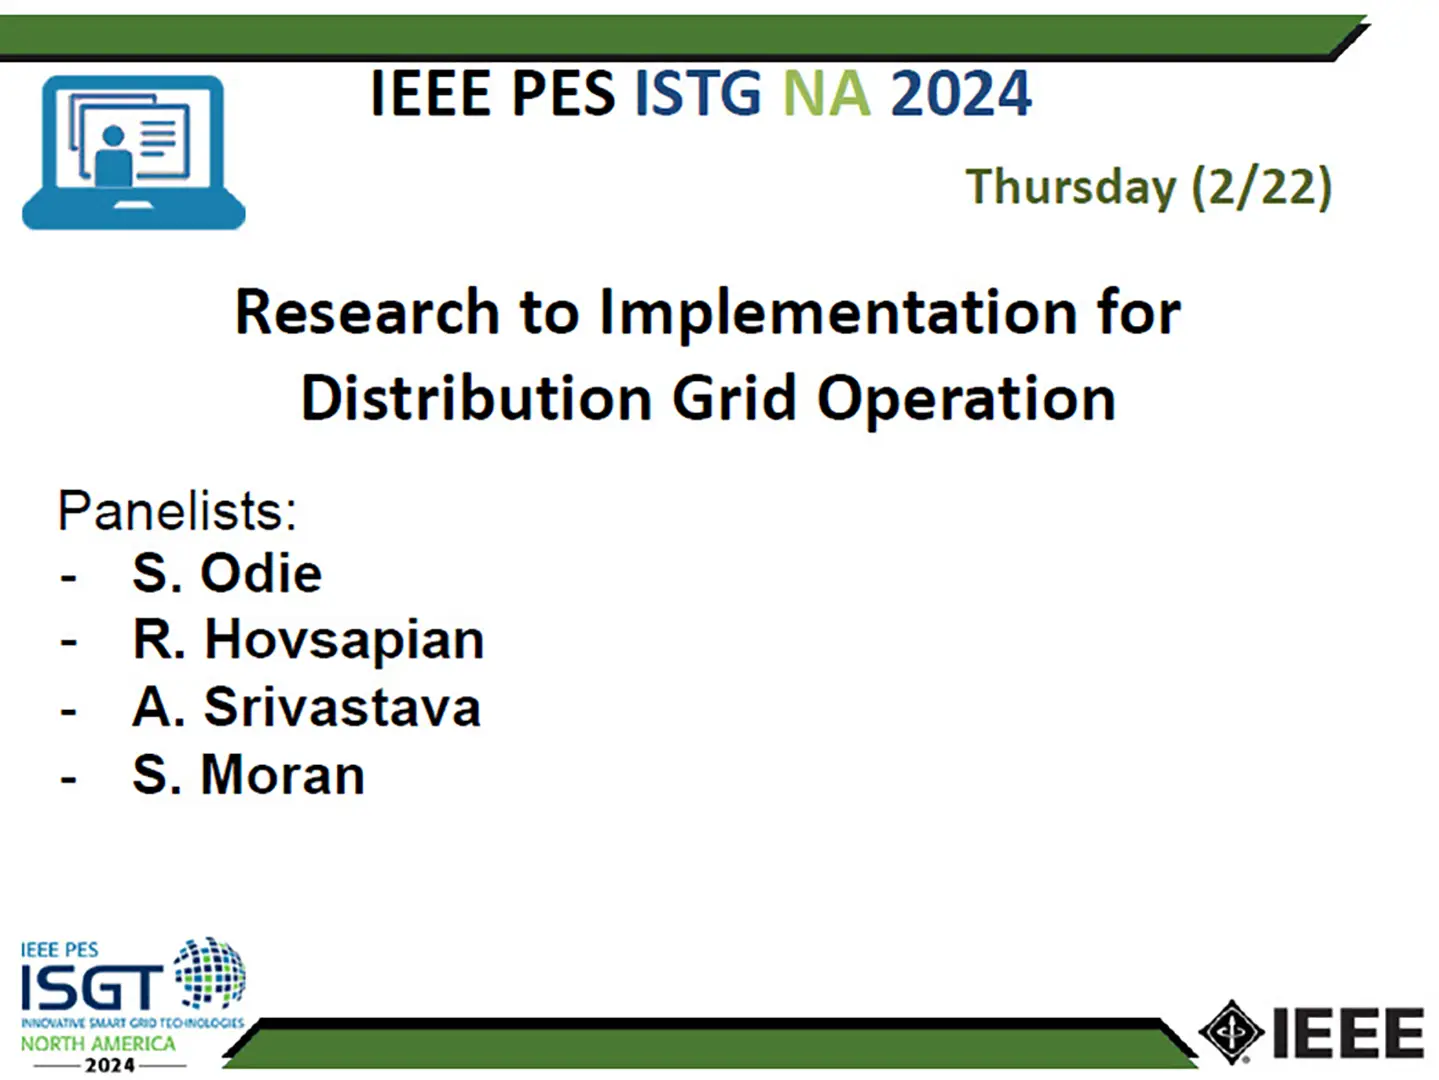 Research to Implementation forDistribution Grid Operation (slides)